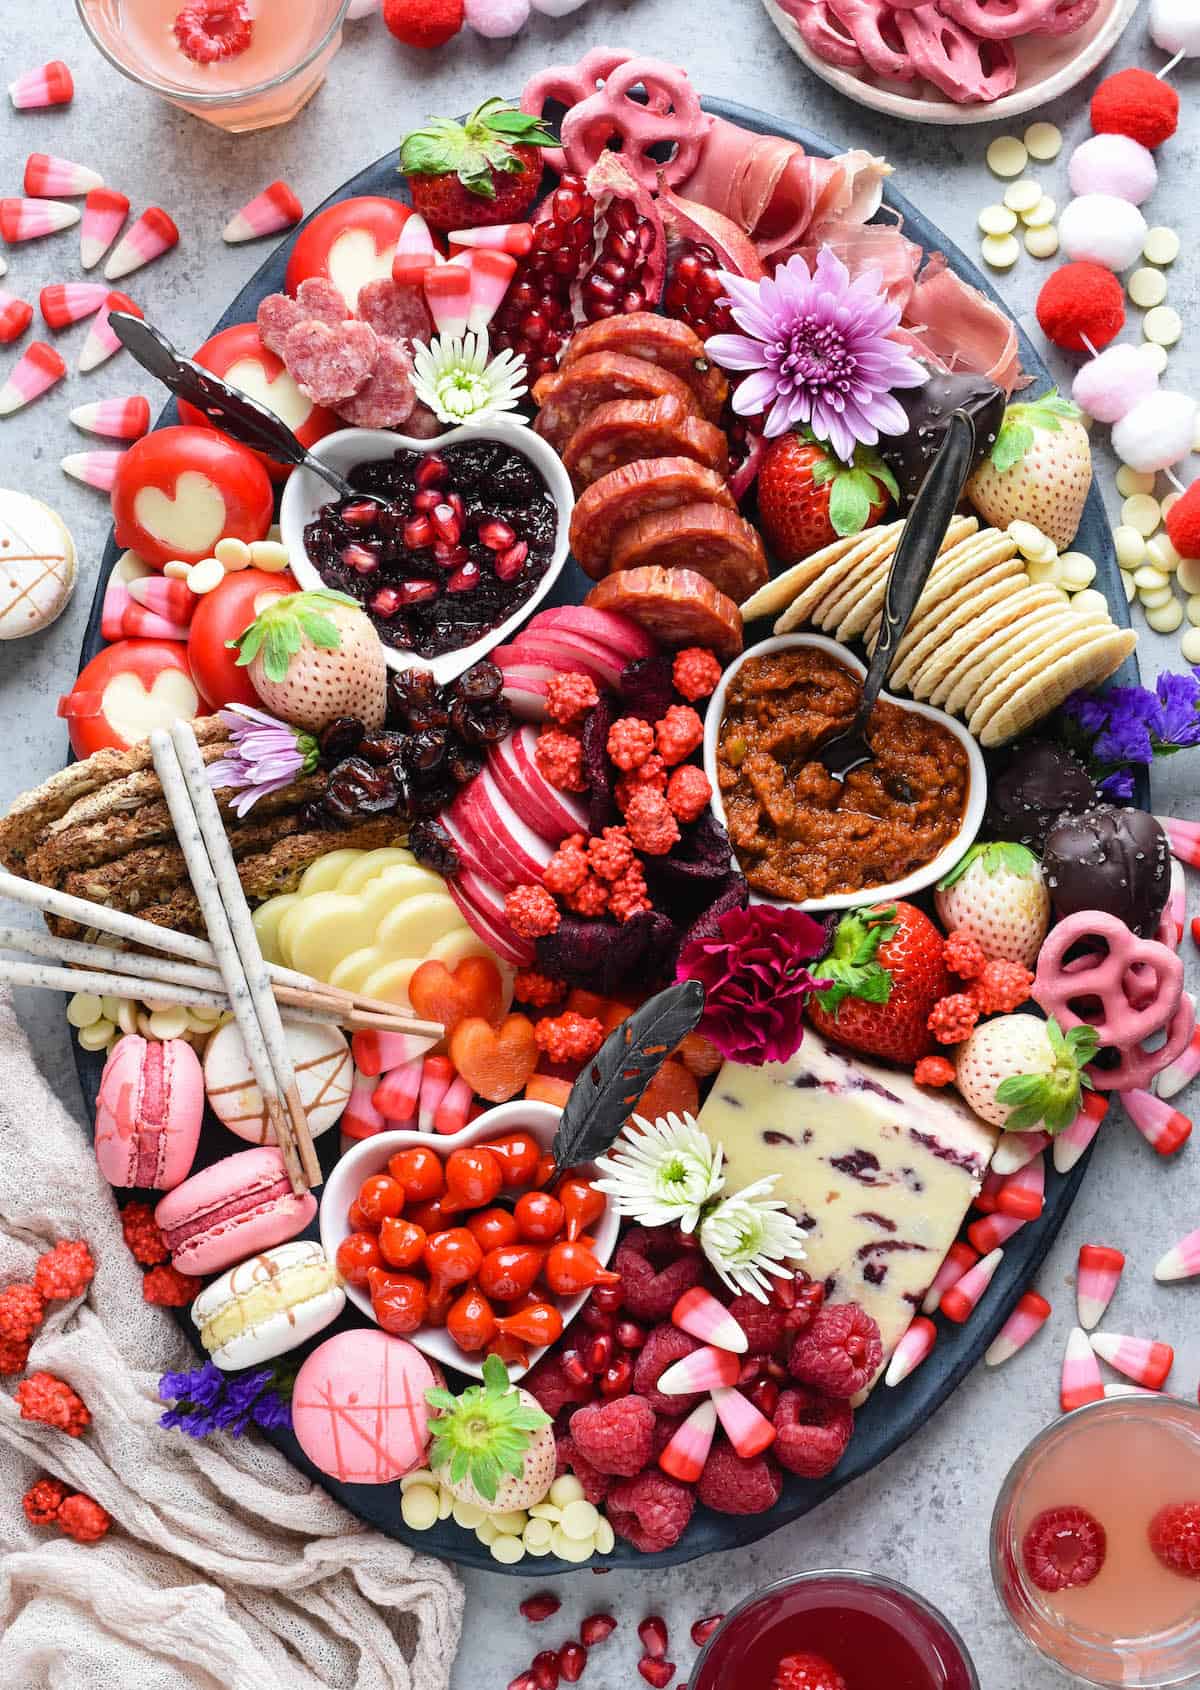 Large oval platter filled with red, pink and white Valentine's Day snacks, including cheese, charcuterie, fruits, vegetables, crackers and sweets.